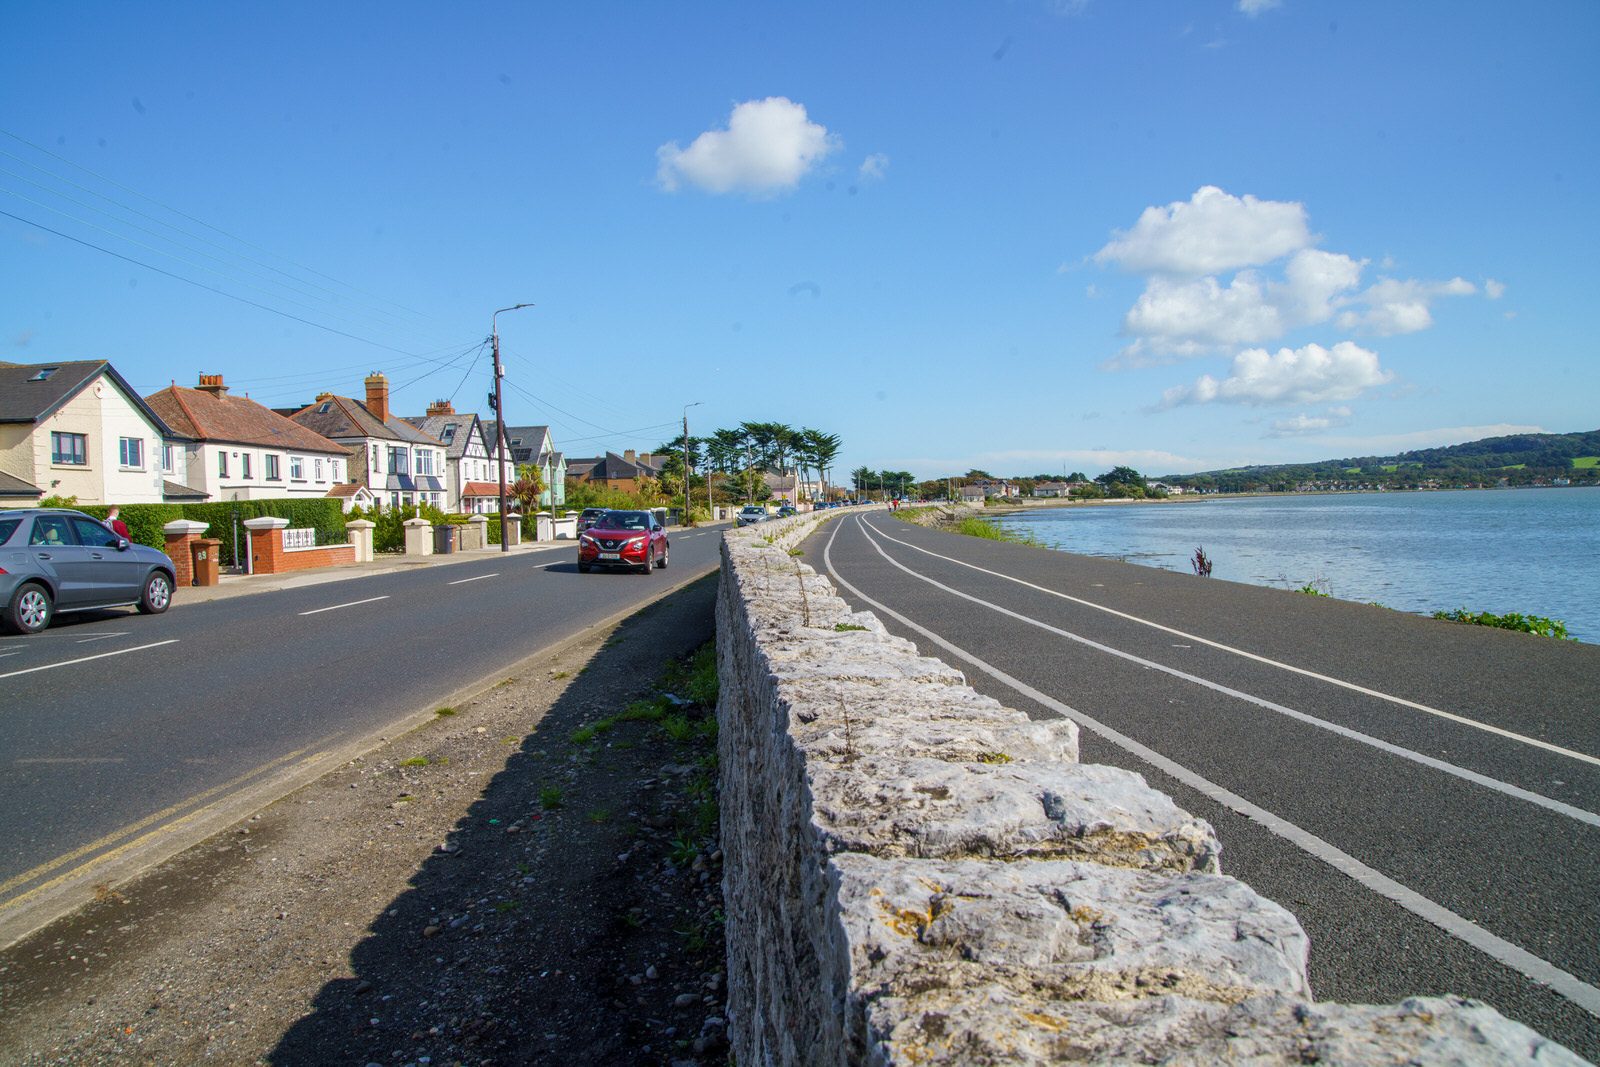 MY FIRST TIME TO WALK ALONG THIS SECTION OF THE SEAFRONT ALONG THE DUBLIN ROAD IN SUTTON